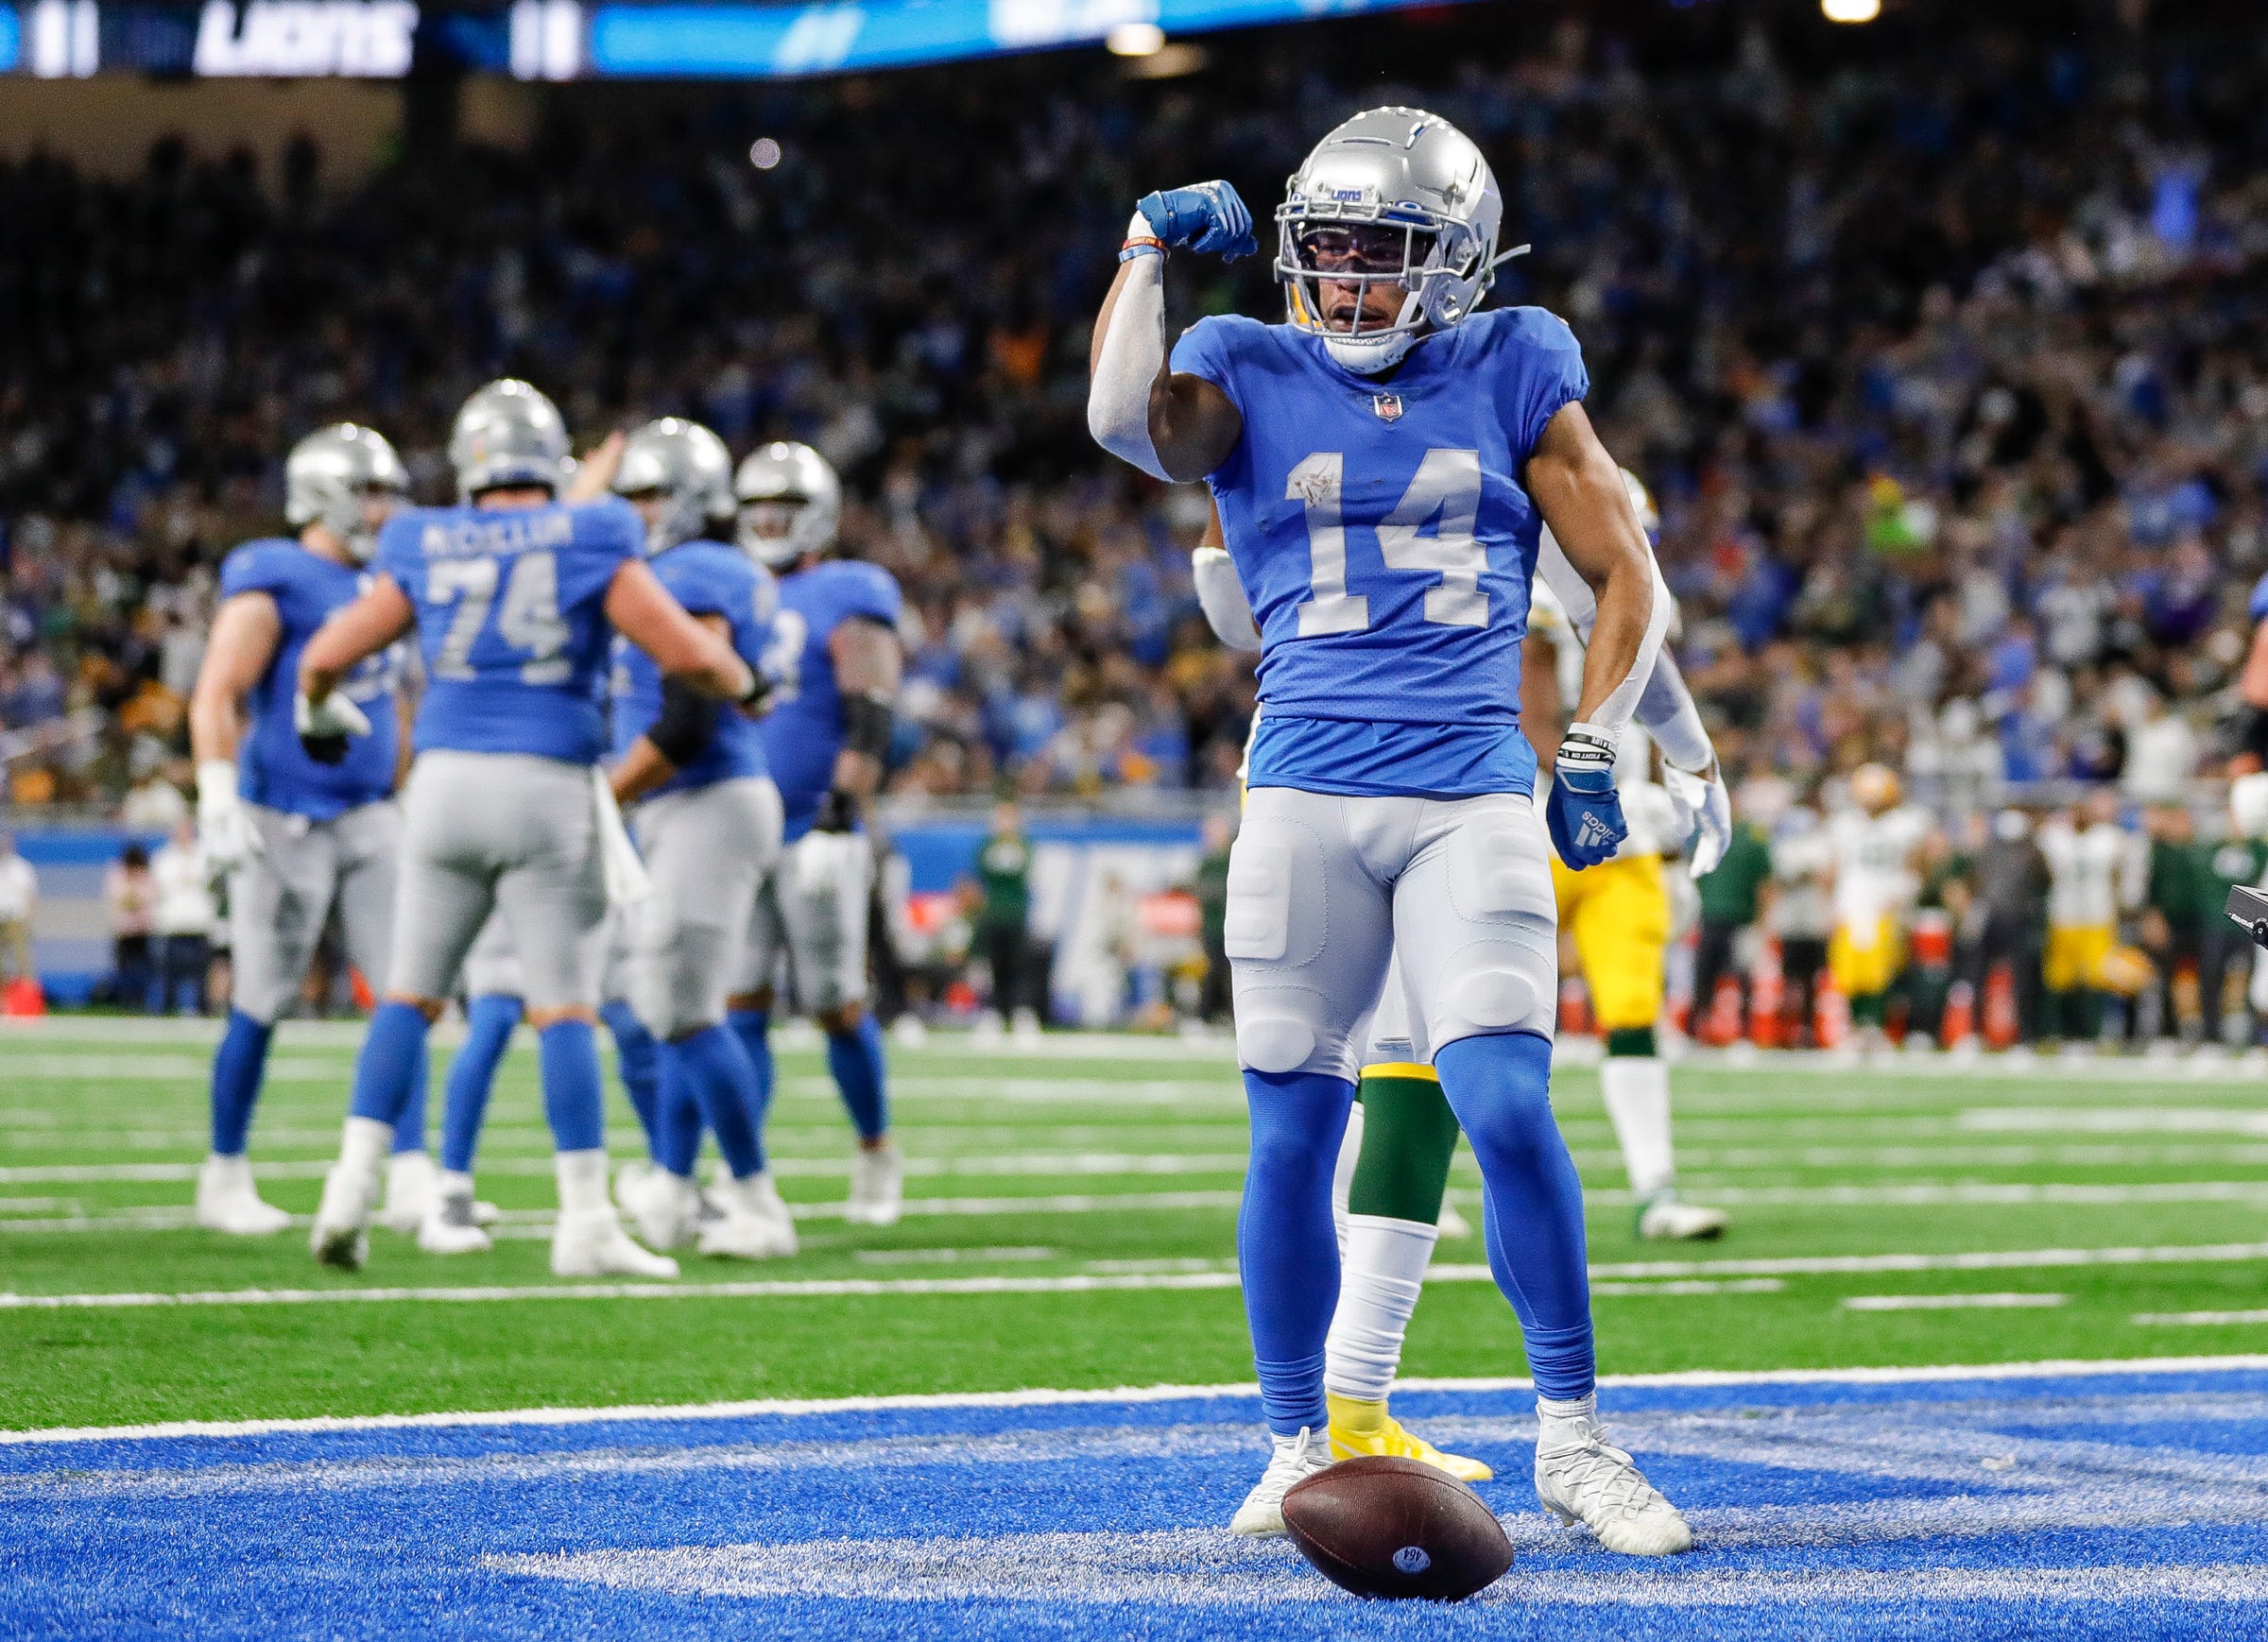 Lions wide receiver Amon-Ra St. Brown scores a touchdown during the first half of the Lions’ 37-30 win over the Packers on Sunday, Jan. 9, 2022, at Ford Field.